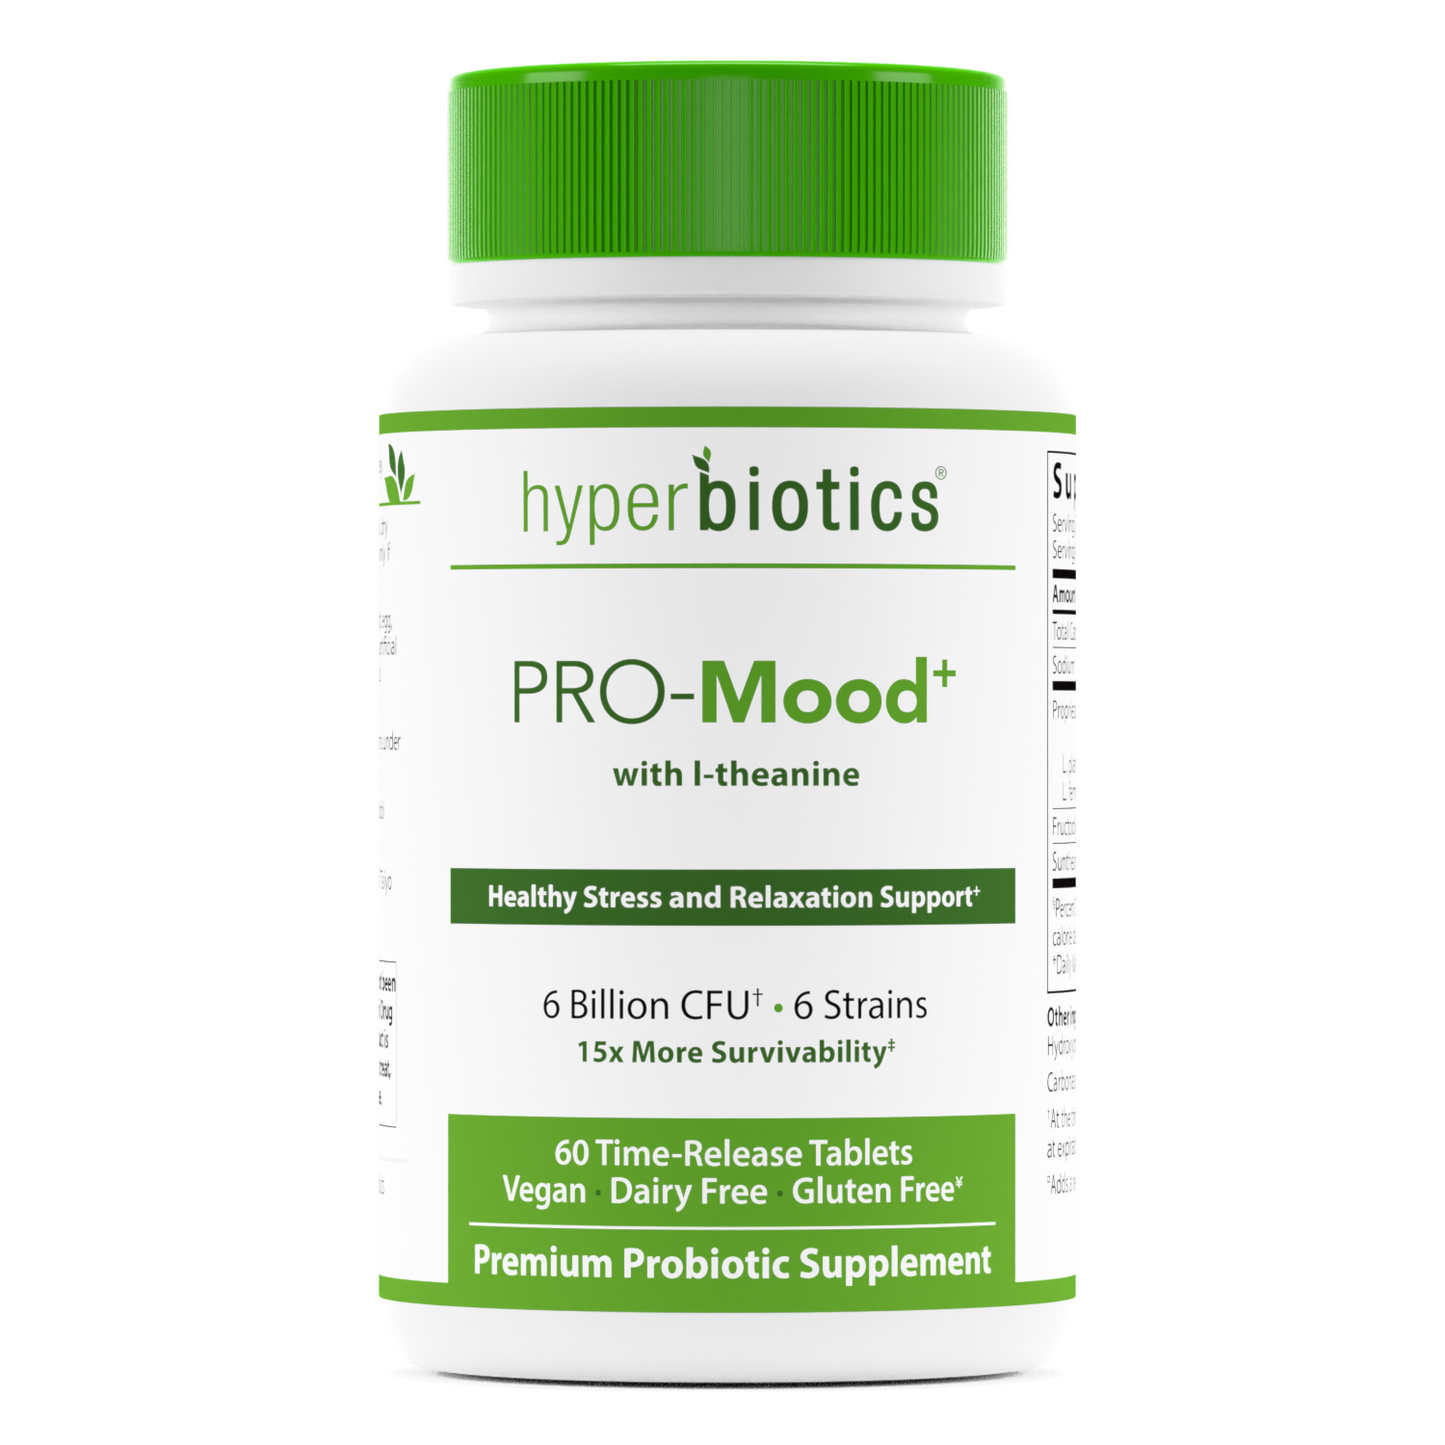 PRO-Mood: Healthy Stress and Relaxation Support* - Hyperbiotics